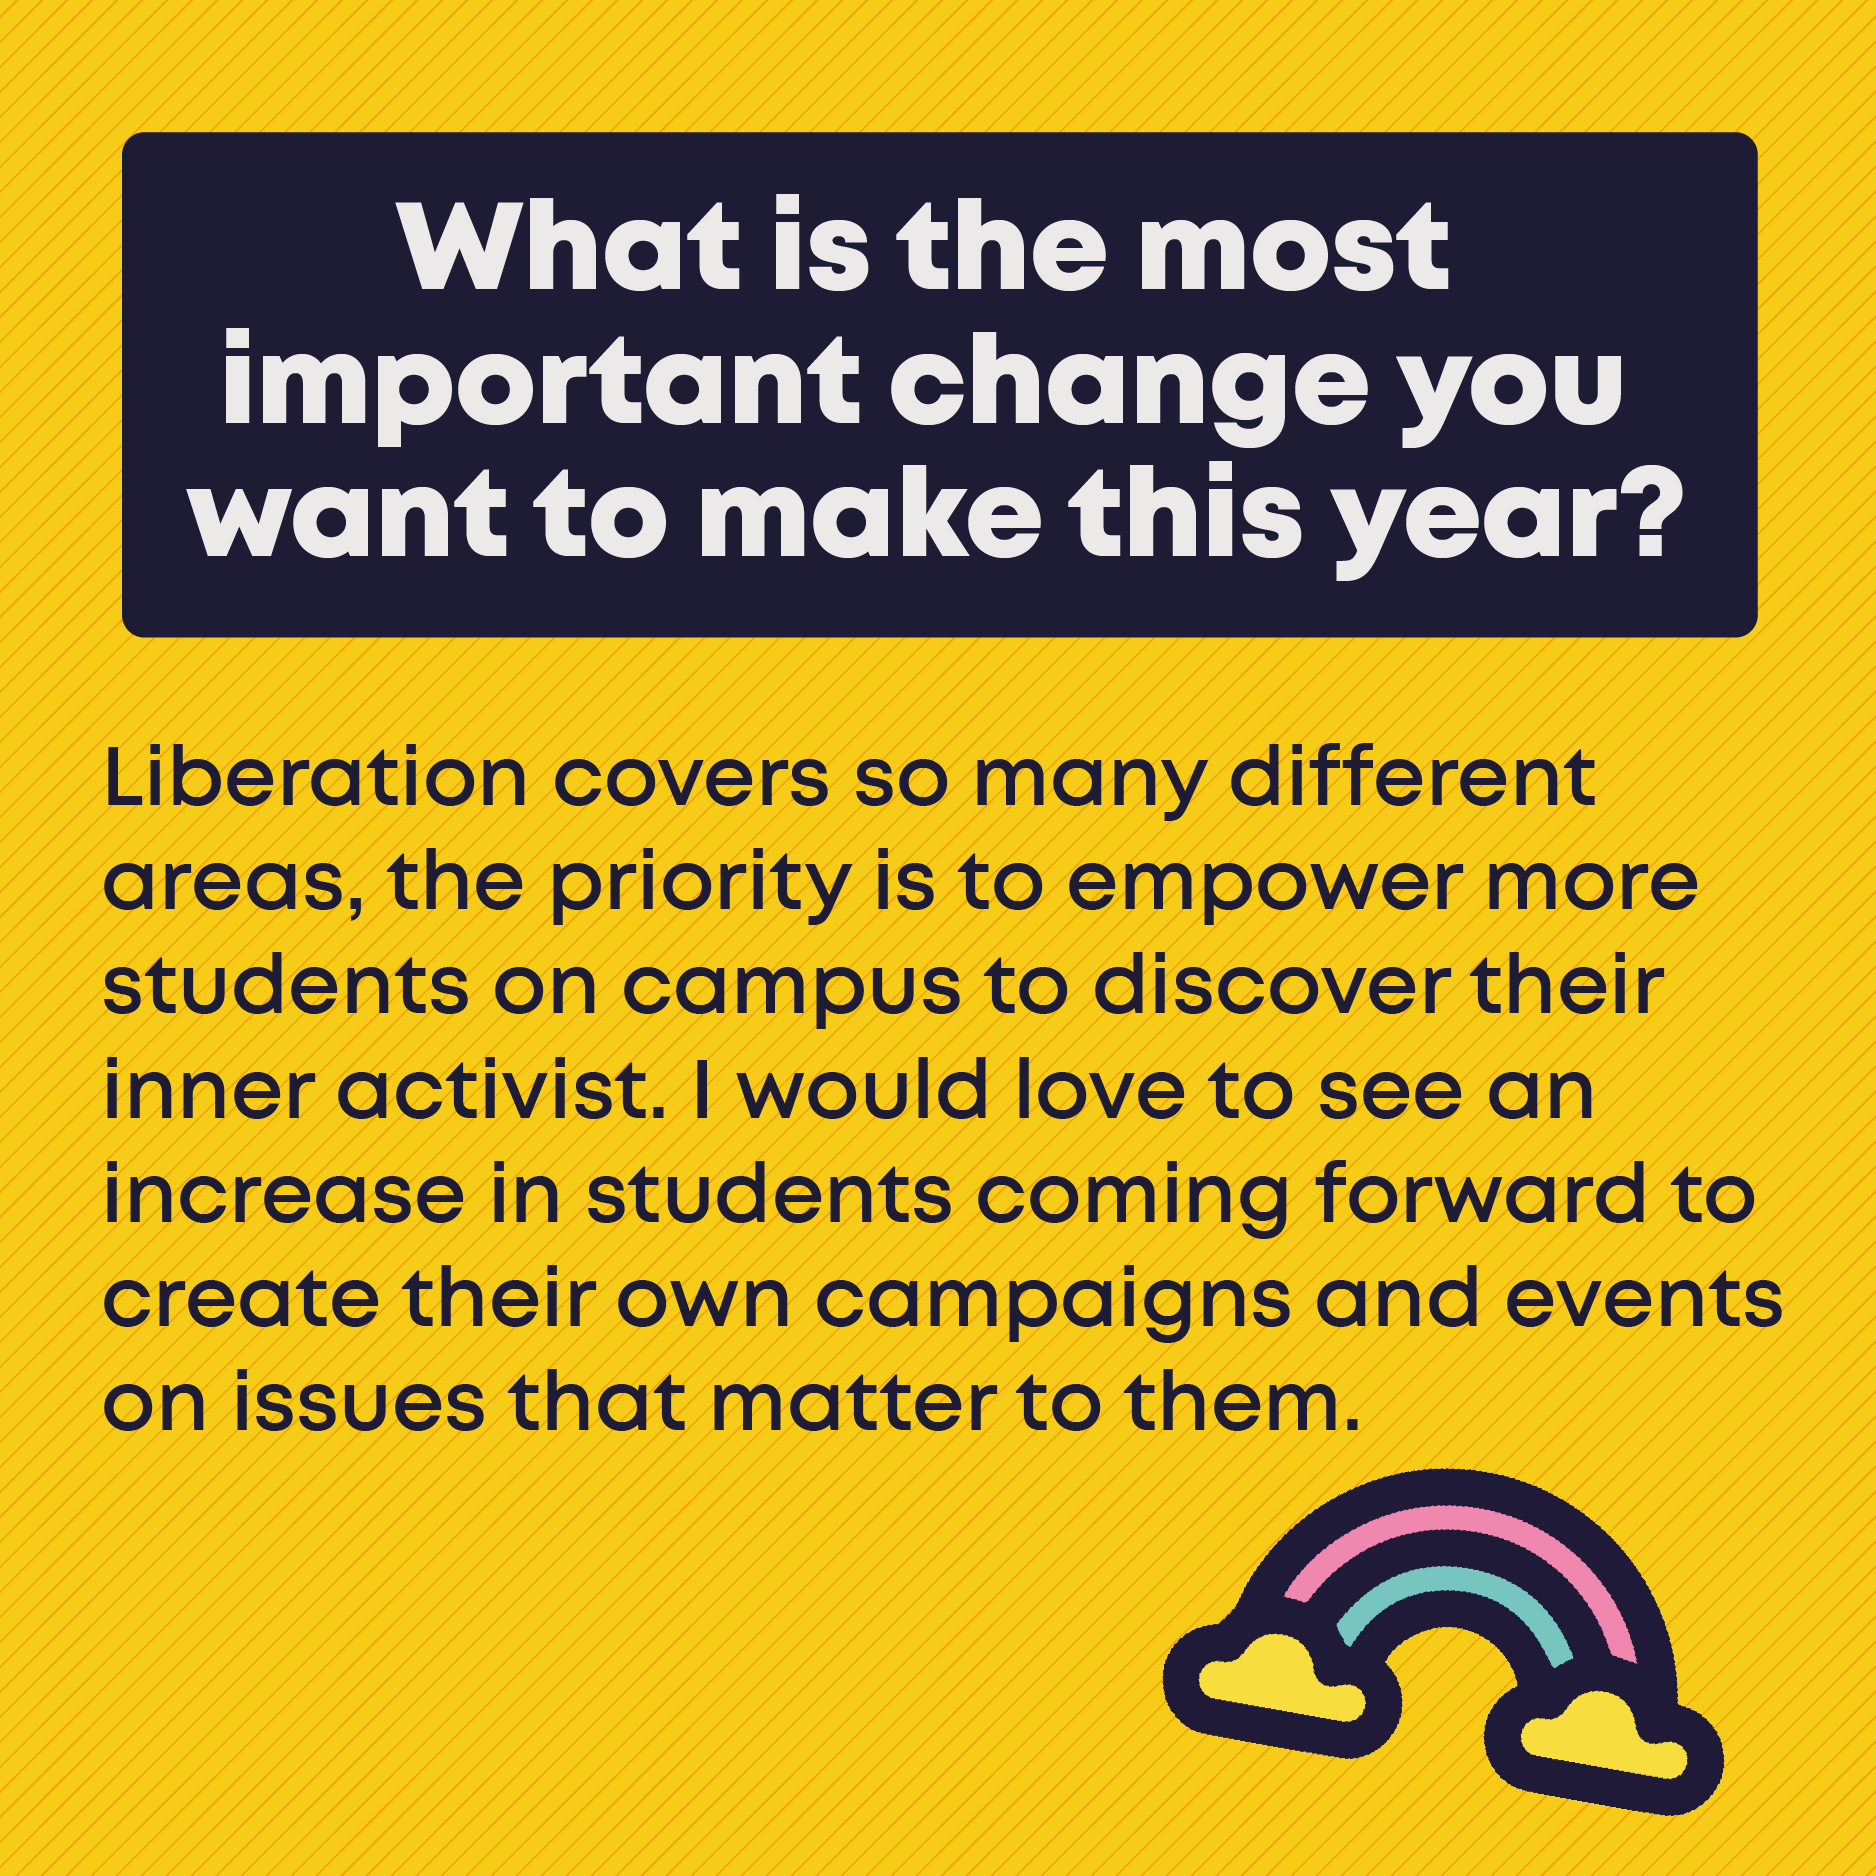 What is the most important change you want to make this year? Liberation covers so many different areas, the priority is to empower more students on campus to discover their inner activist. I would love to see an increase in students coming forward to create their own campaigns and events on issues that matter to them.